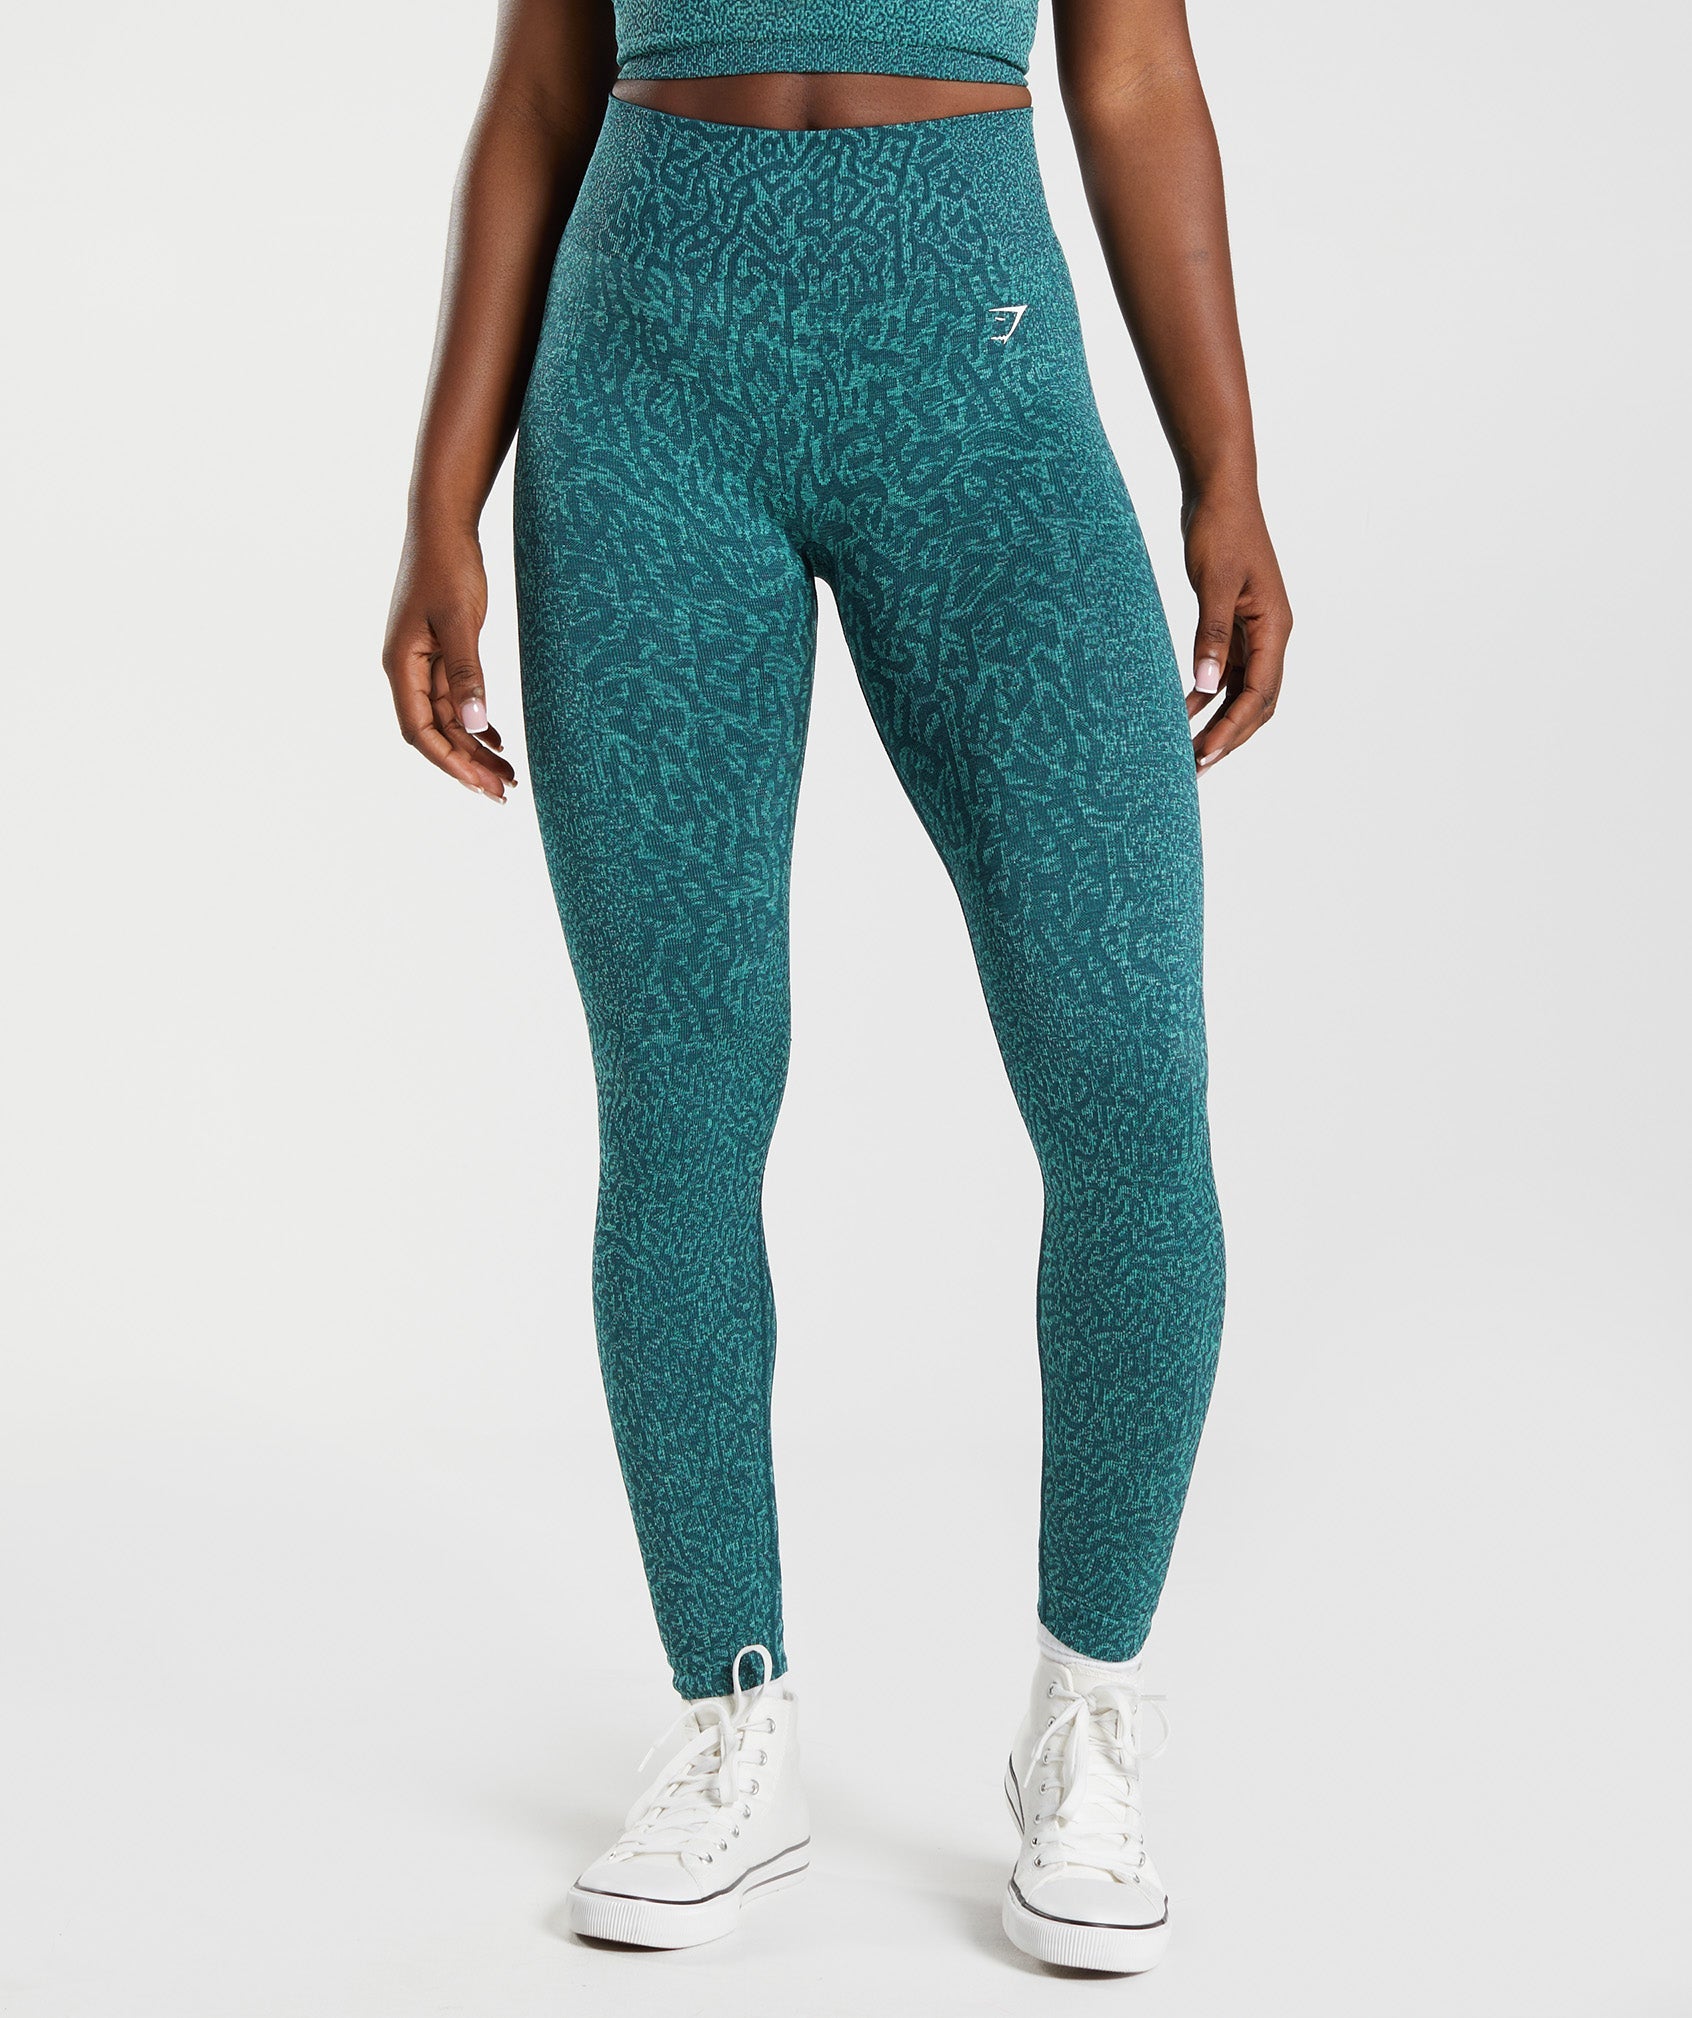 Gymshark Leggings Xs Oder Sauers  International Society of Precision  Agriculture